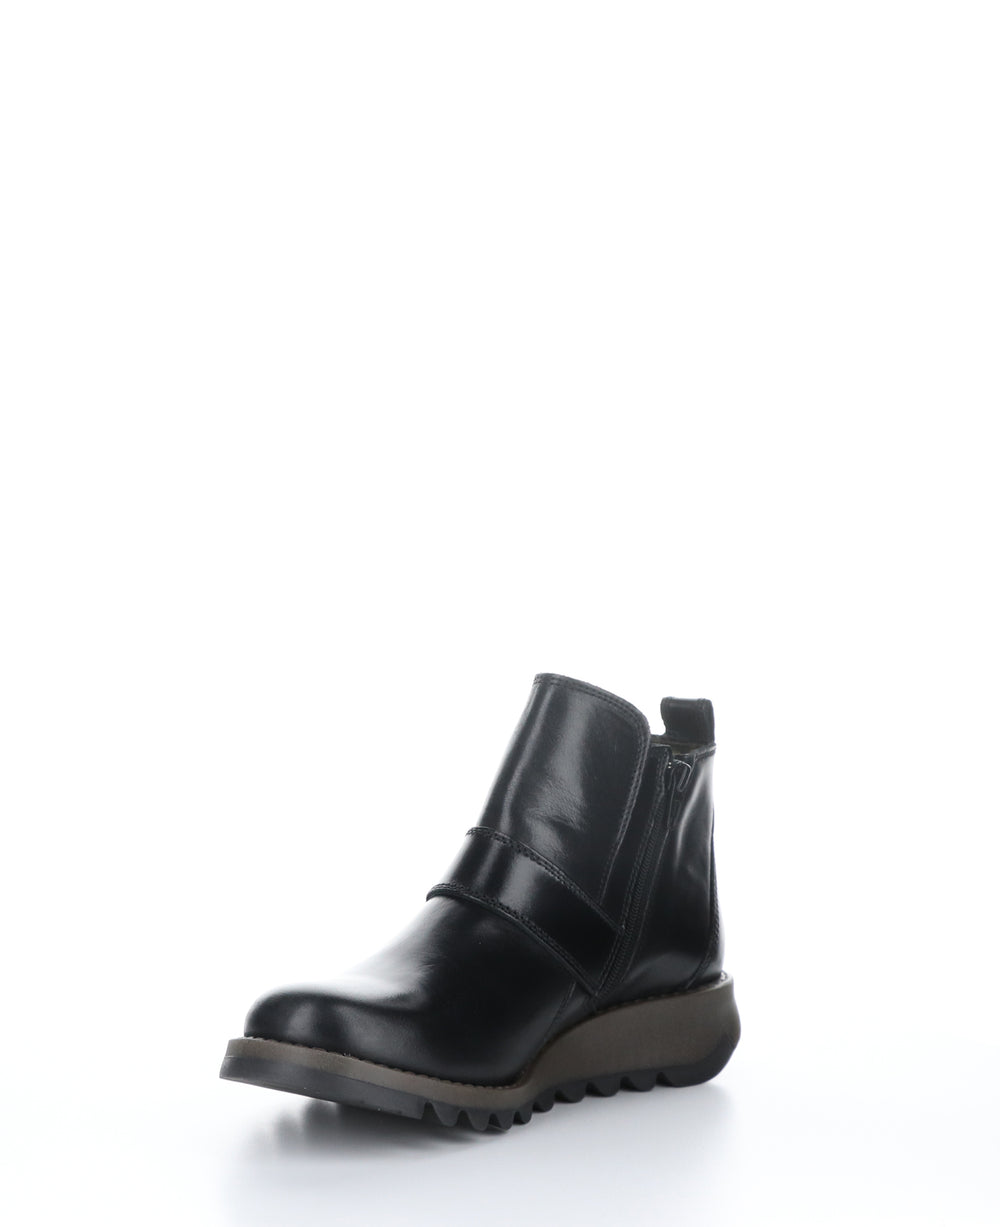 SIAS812FLY Black Zip Up Ankle Boots